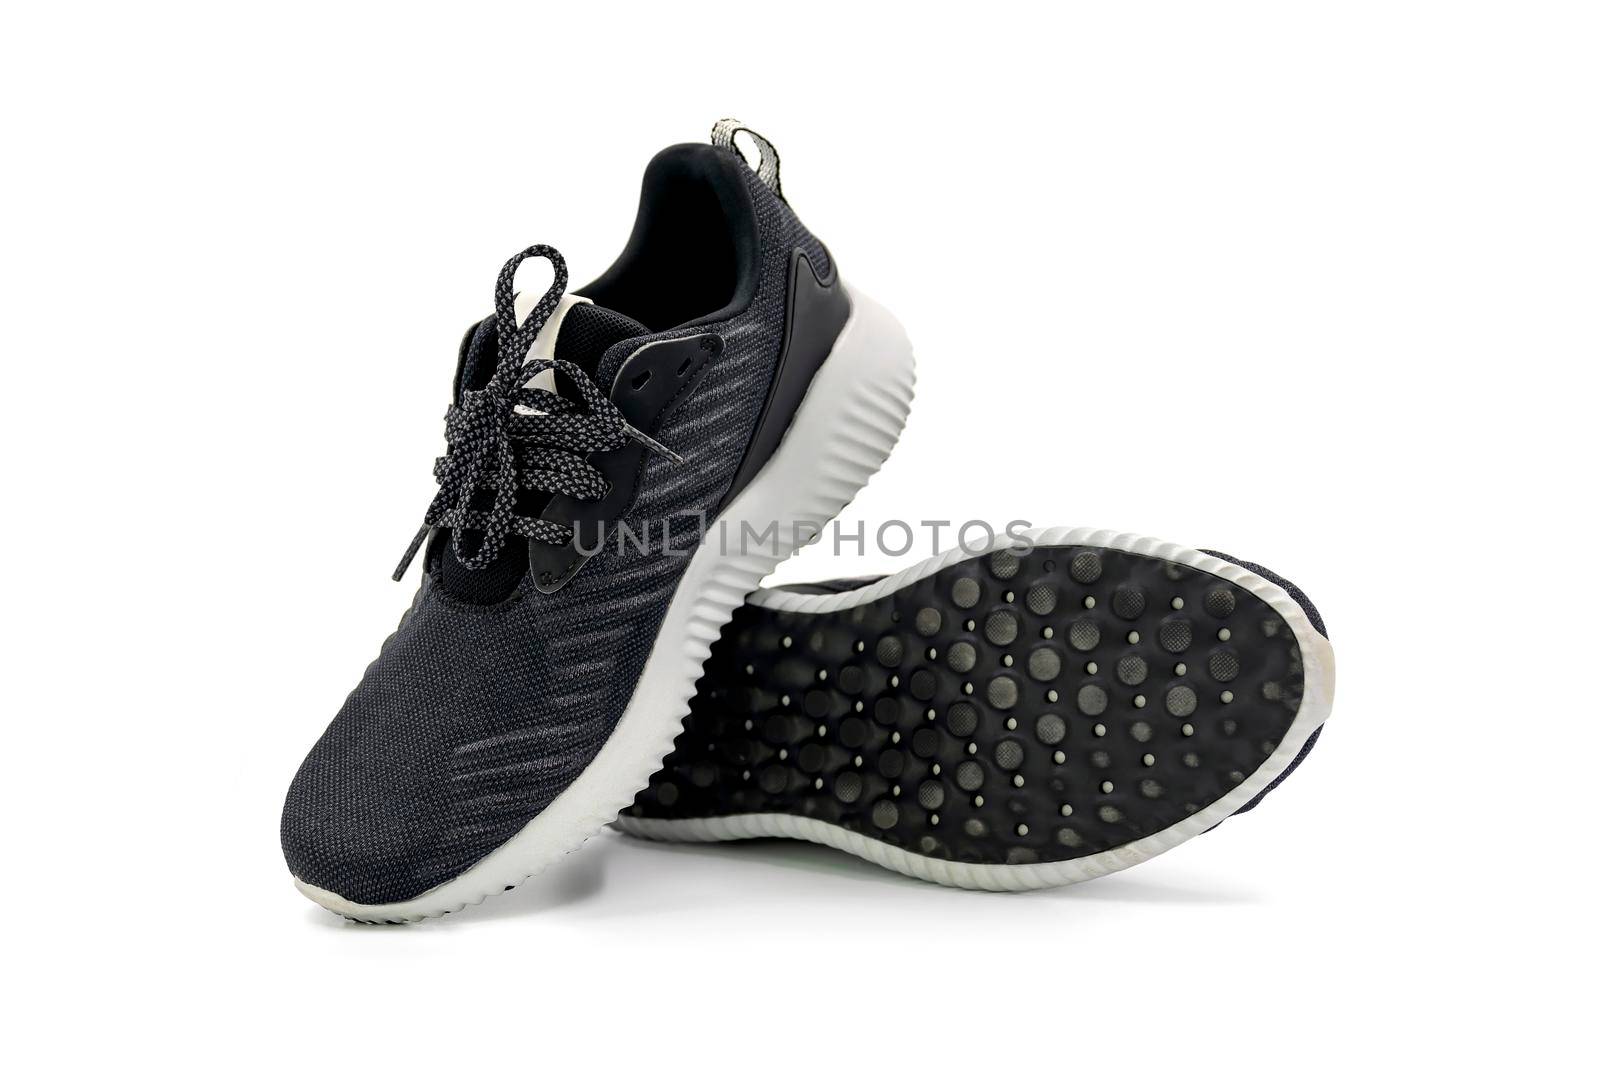 Pair of black color fashion sport shoes isolated on white background. by wattanaphob